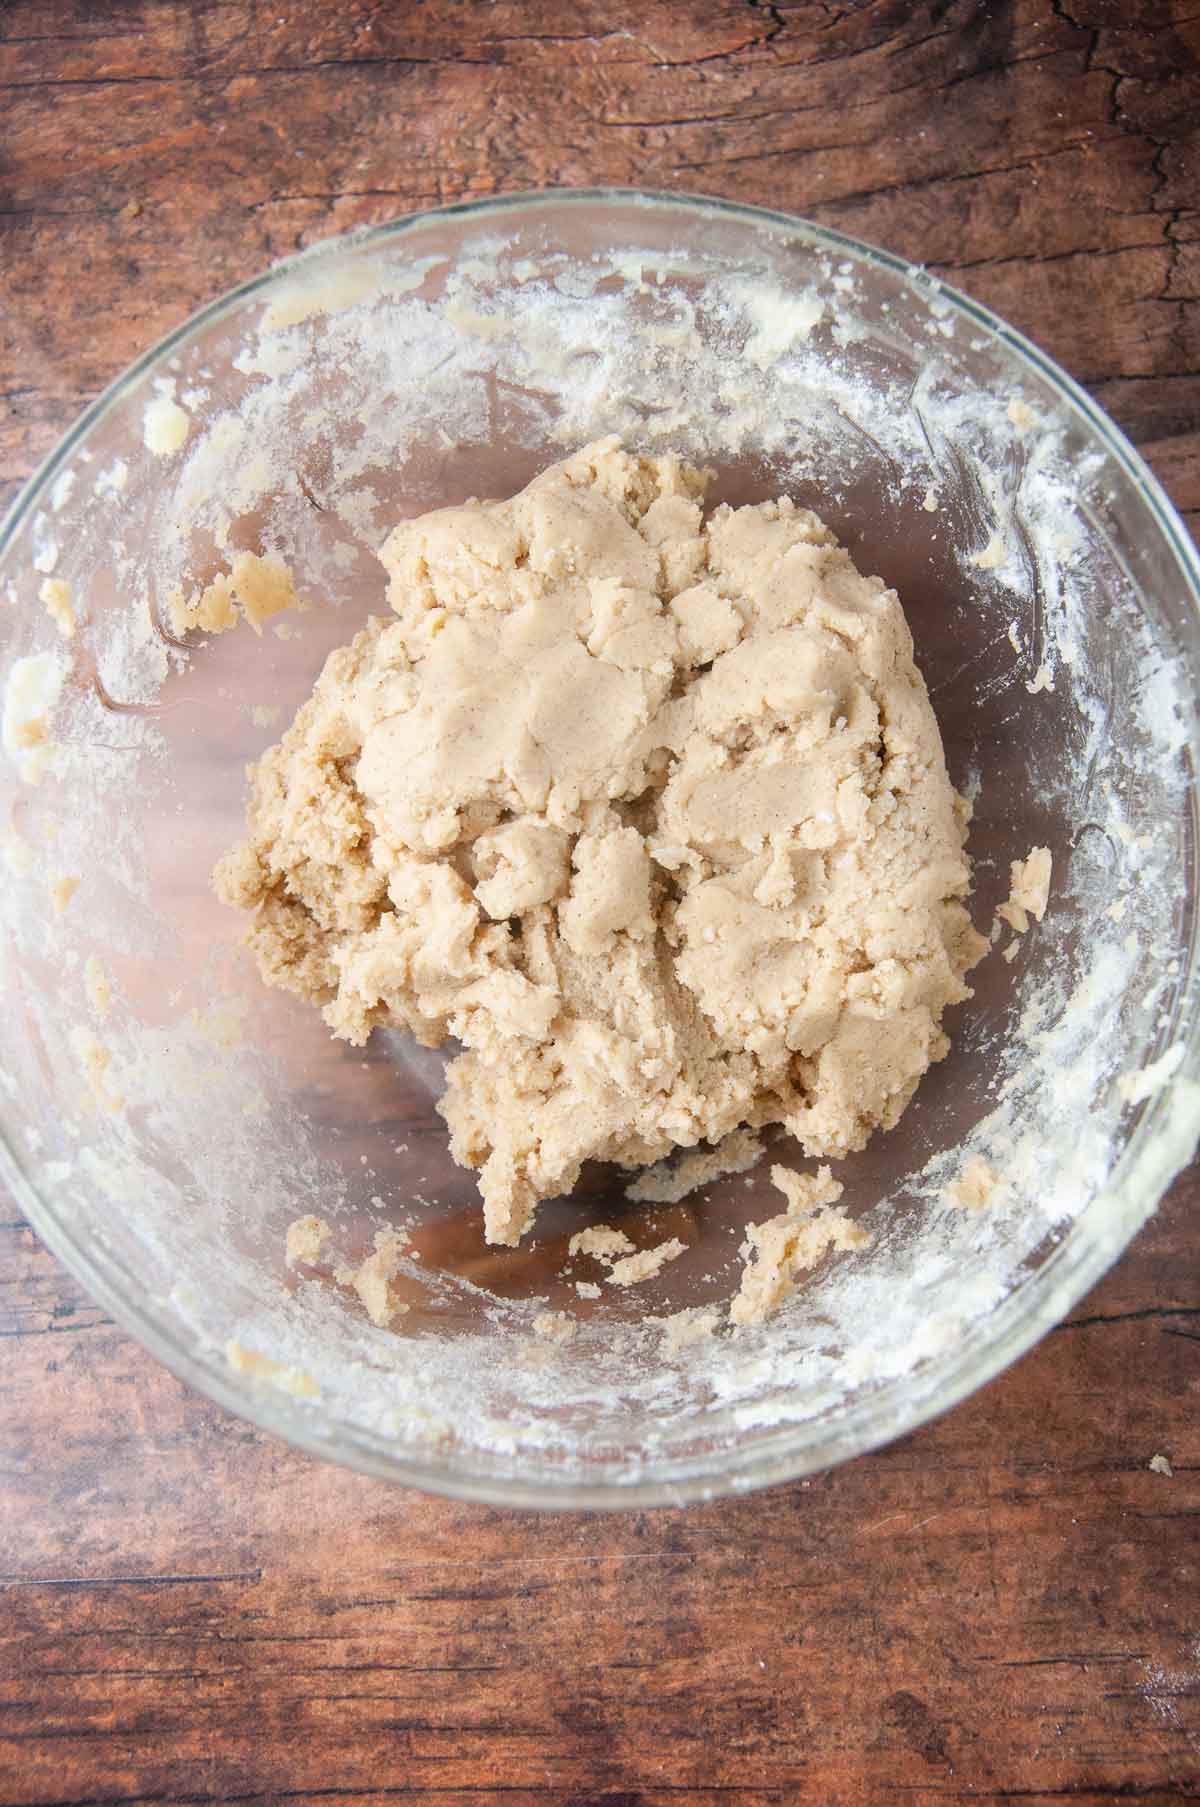 Mix the dry ingredients into the wet ingredients until it forms cookie dough.